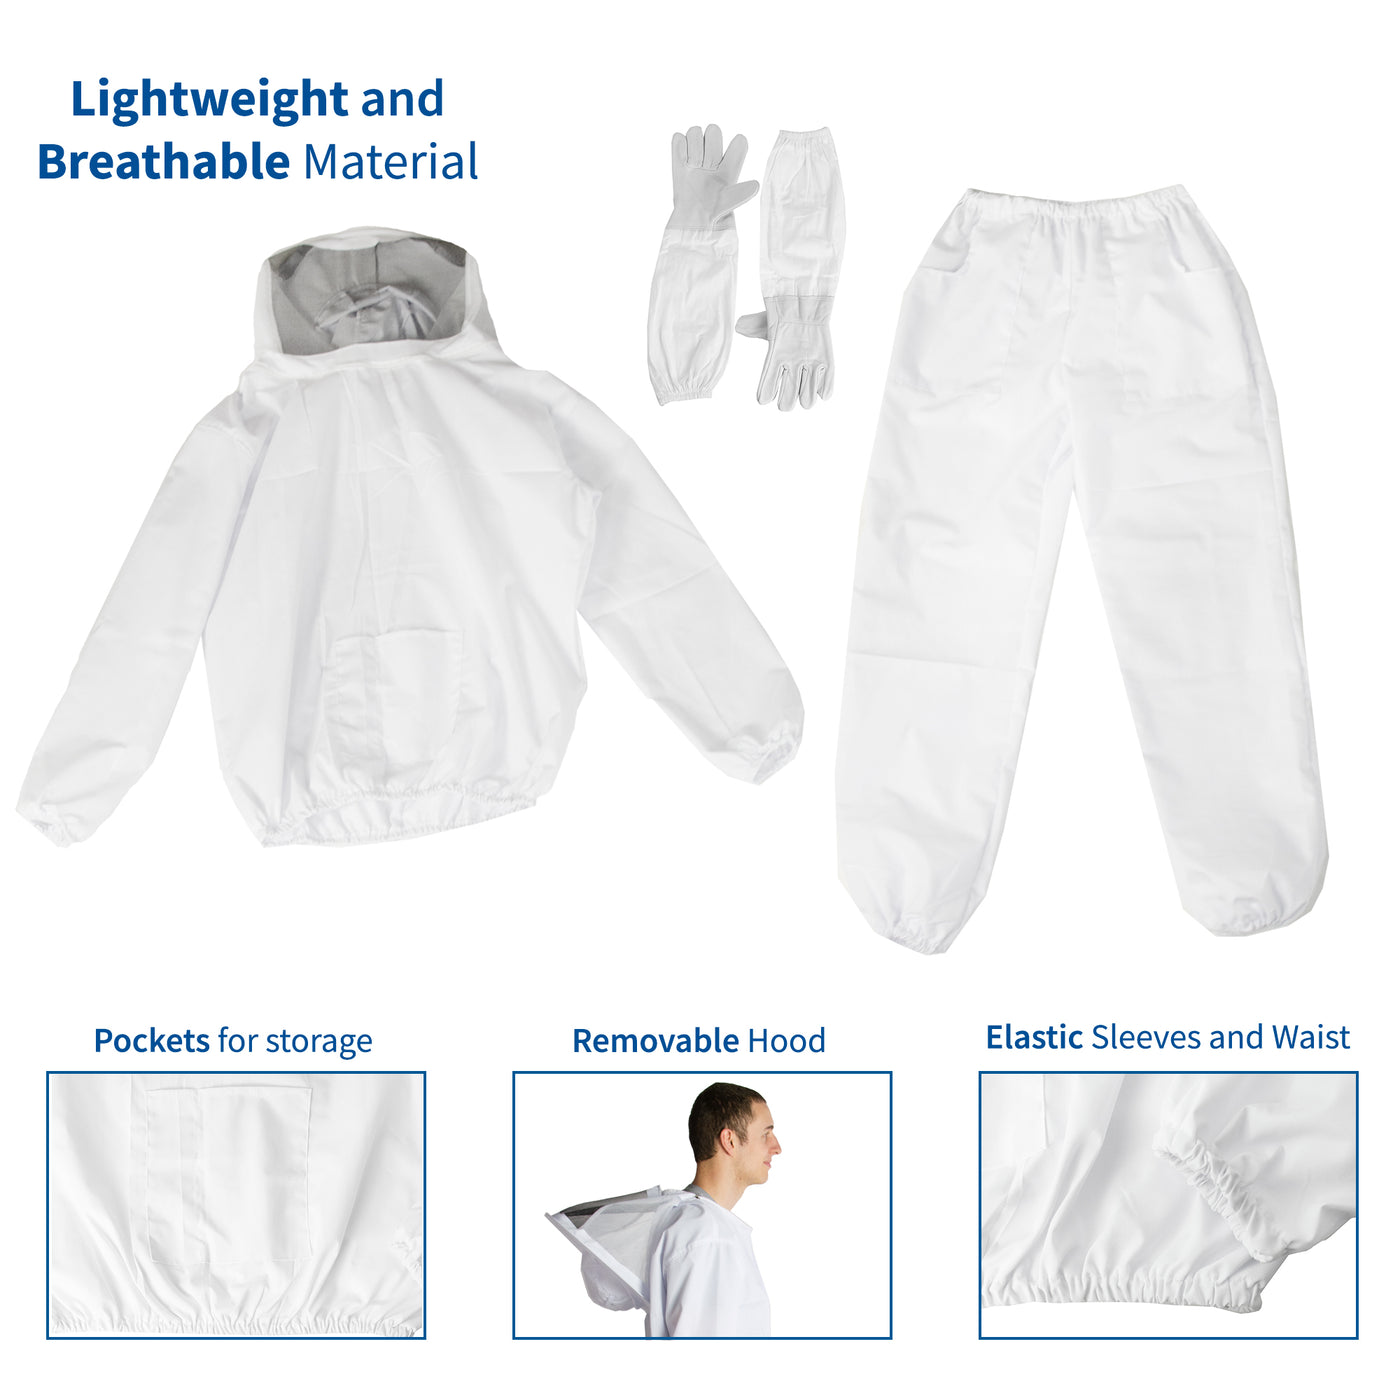 Large Bee Jacket, Pants, and Gloves Set with Storage Pockets, Removable Hood, Elastic Sleeves and Waist, and Lightweight Breathable Matieral